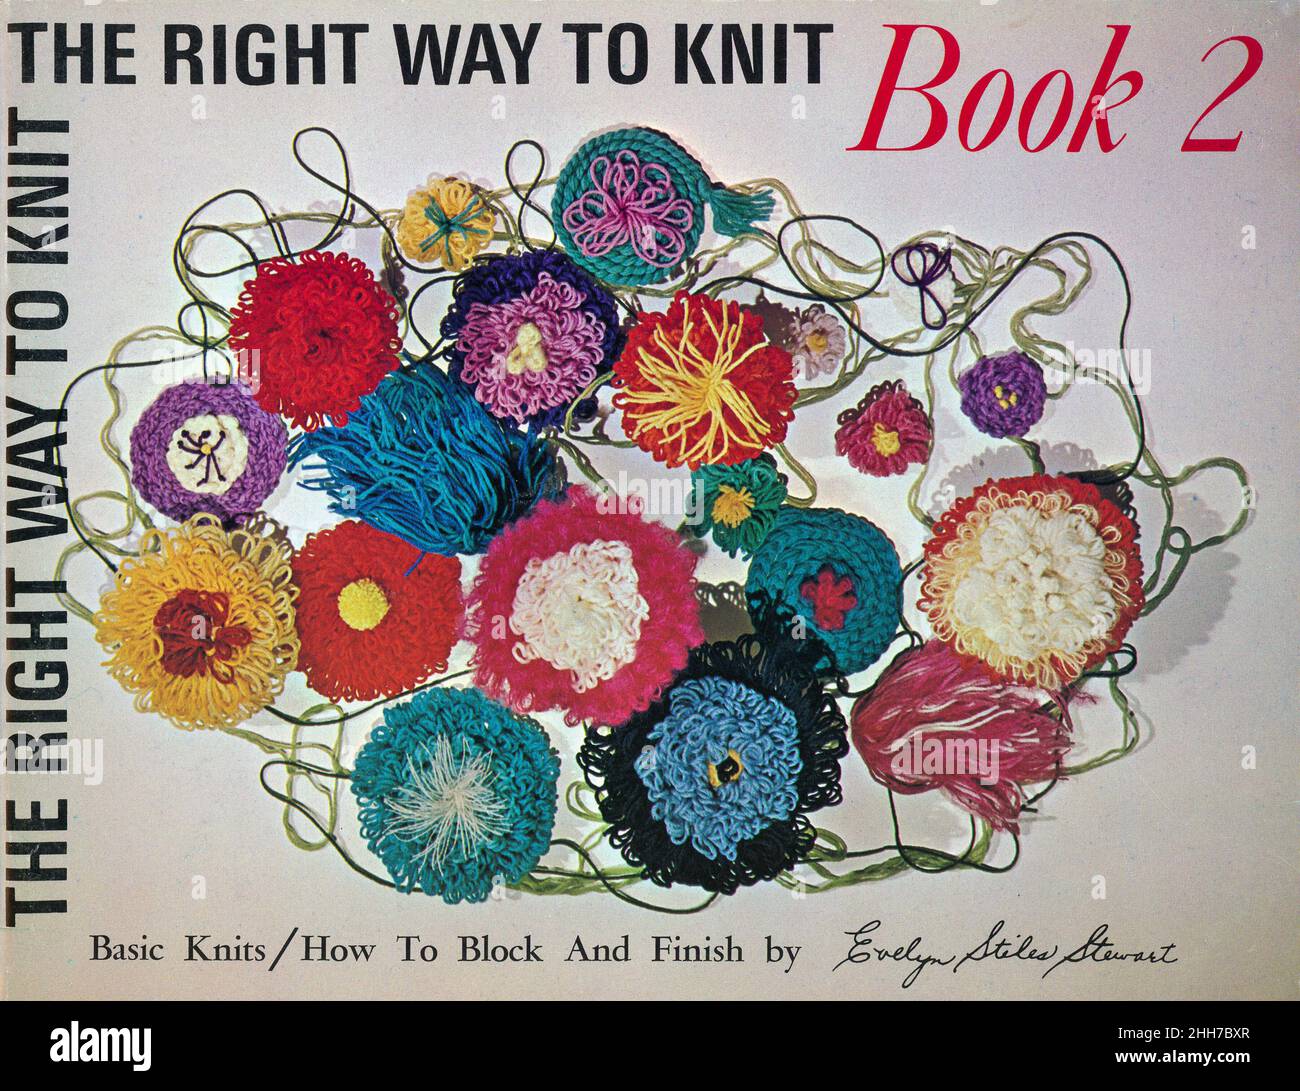 Vintage 'The Right Way to Knit' Anleitung, USA 1969 Stockfoto